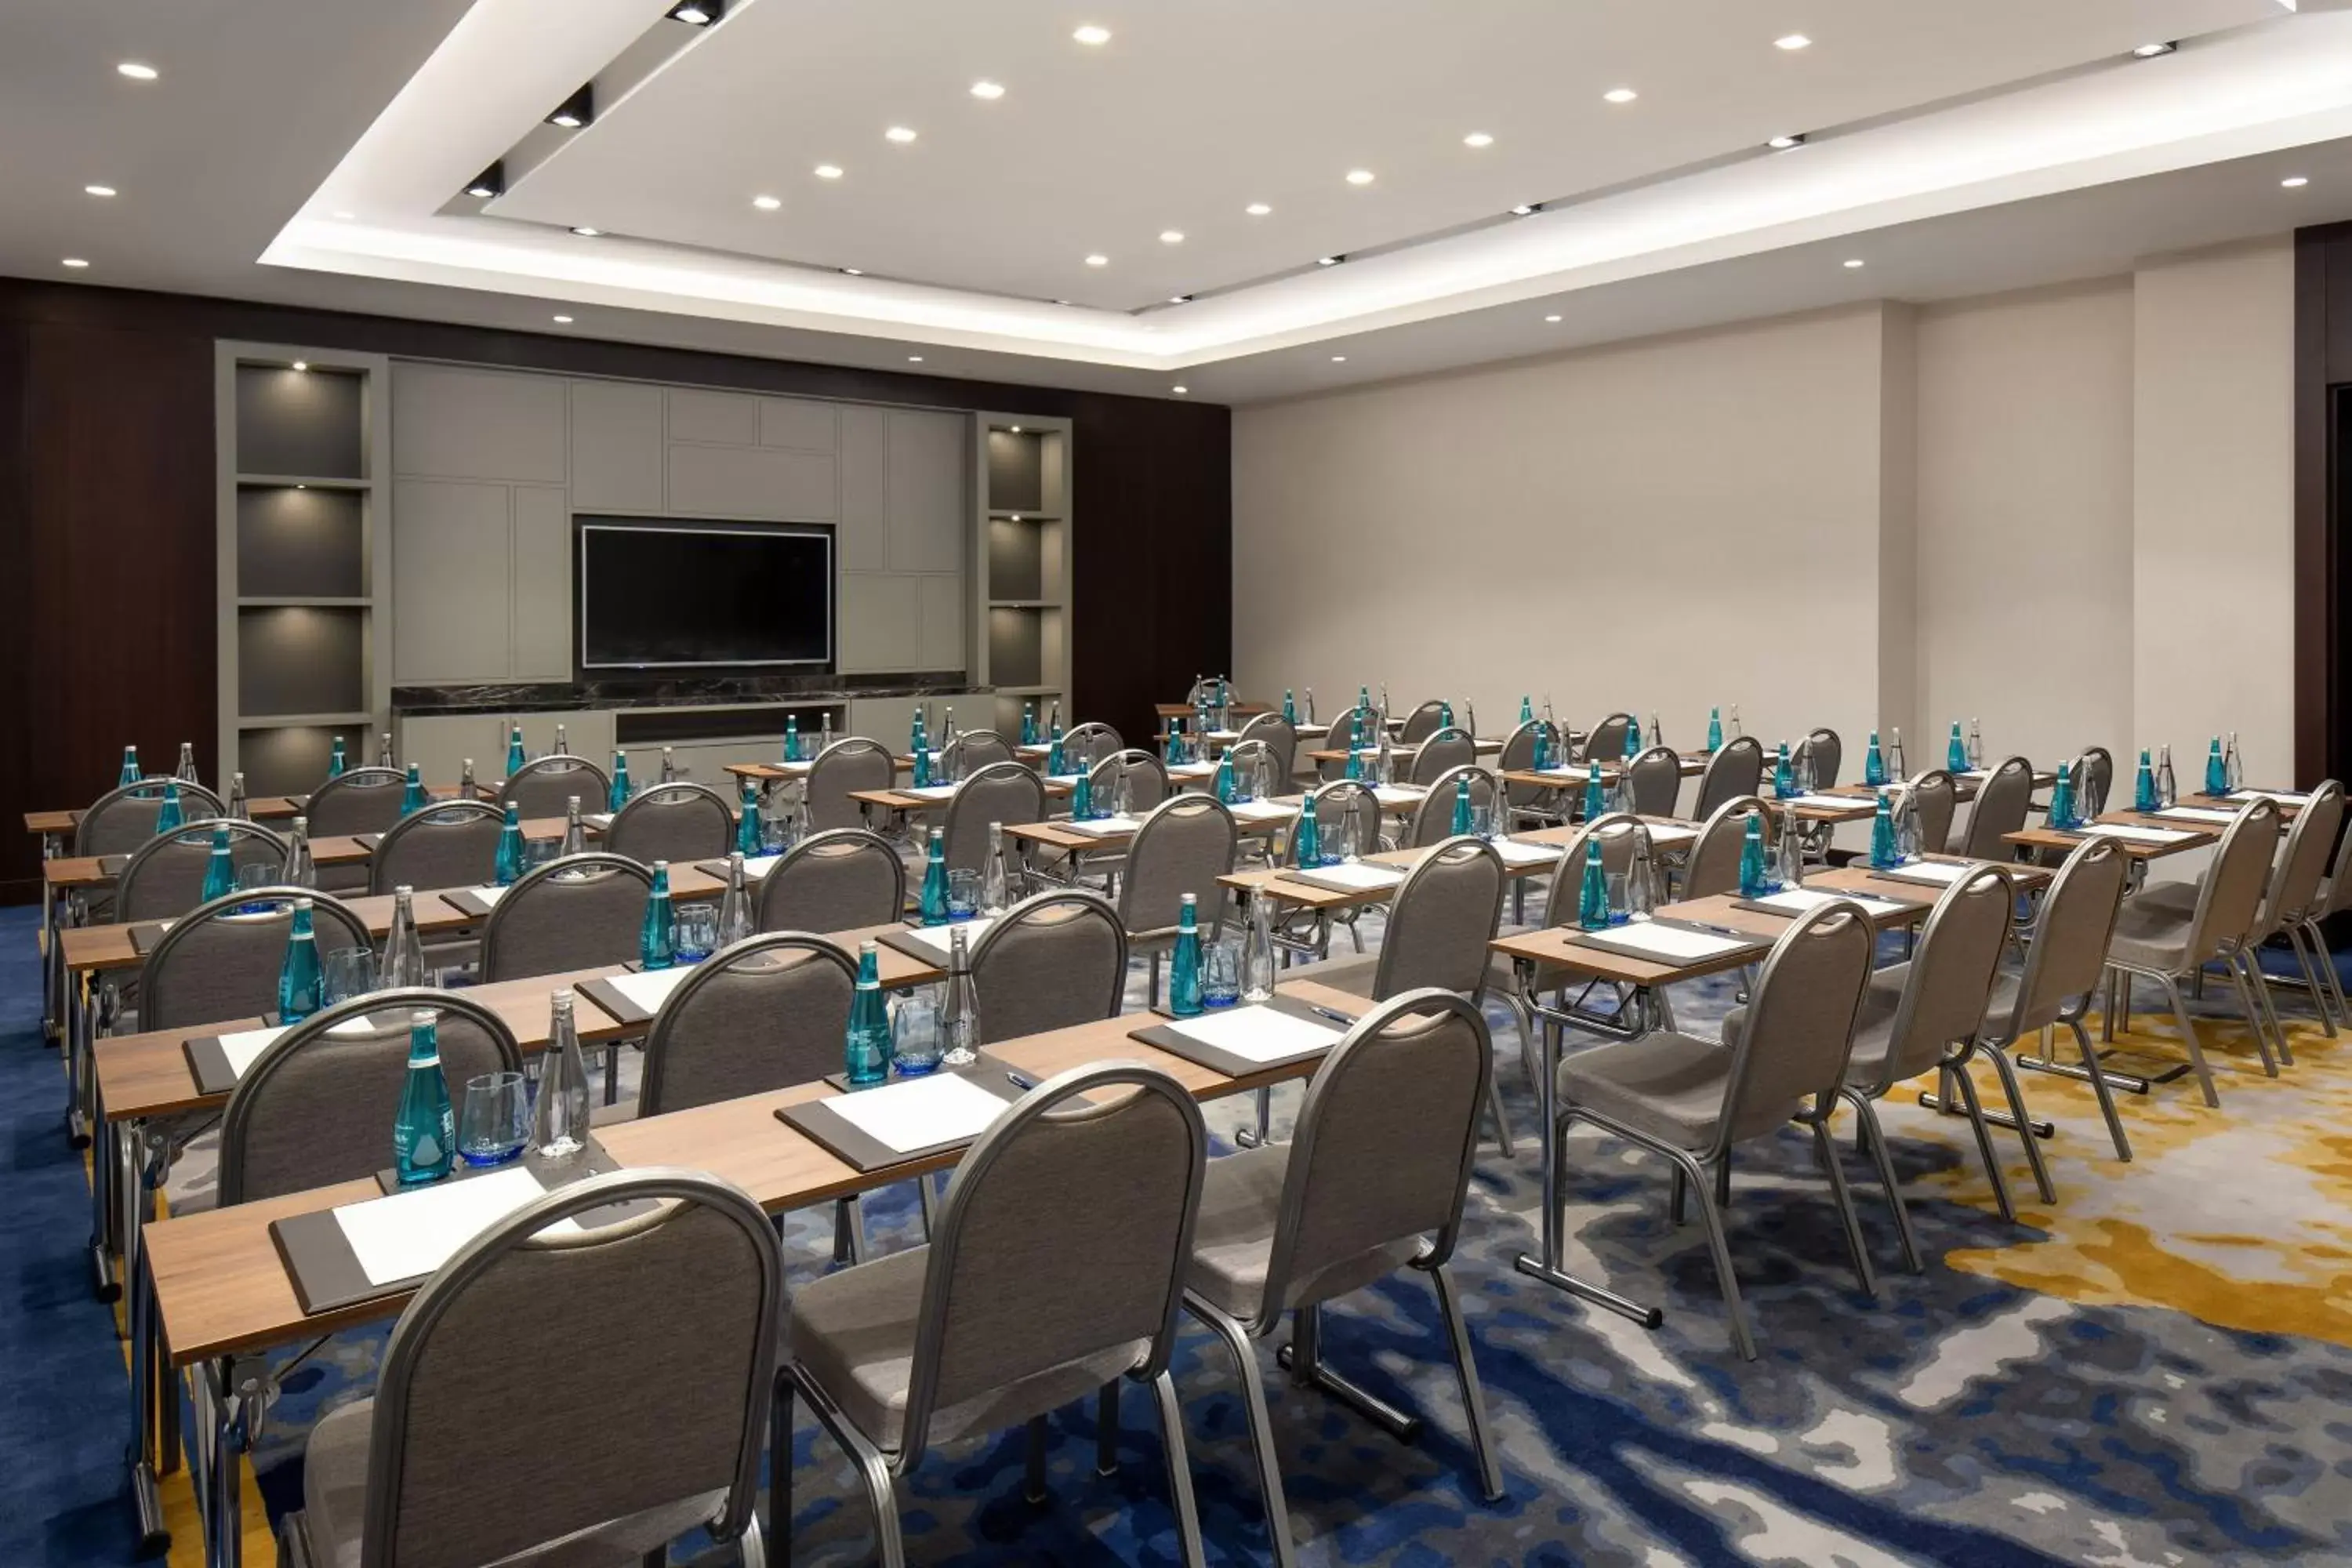 Meeting/conference room in Sheraton Istanbul City Center